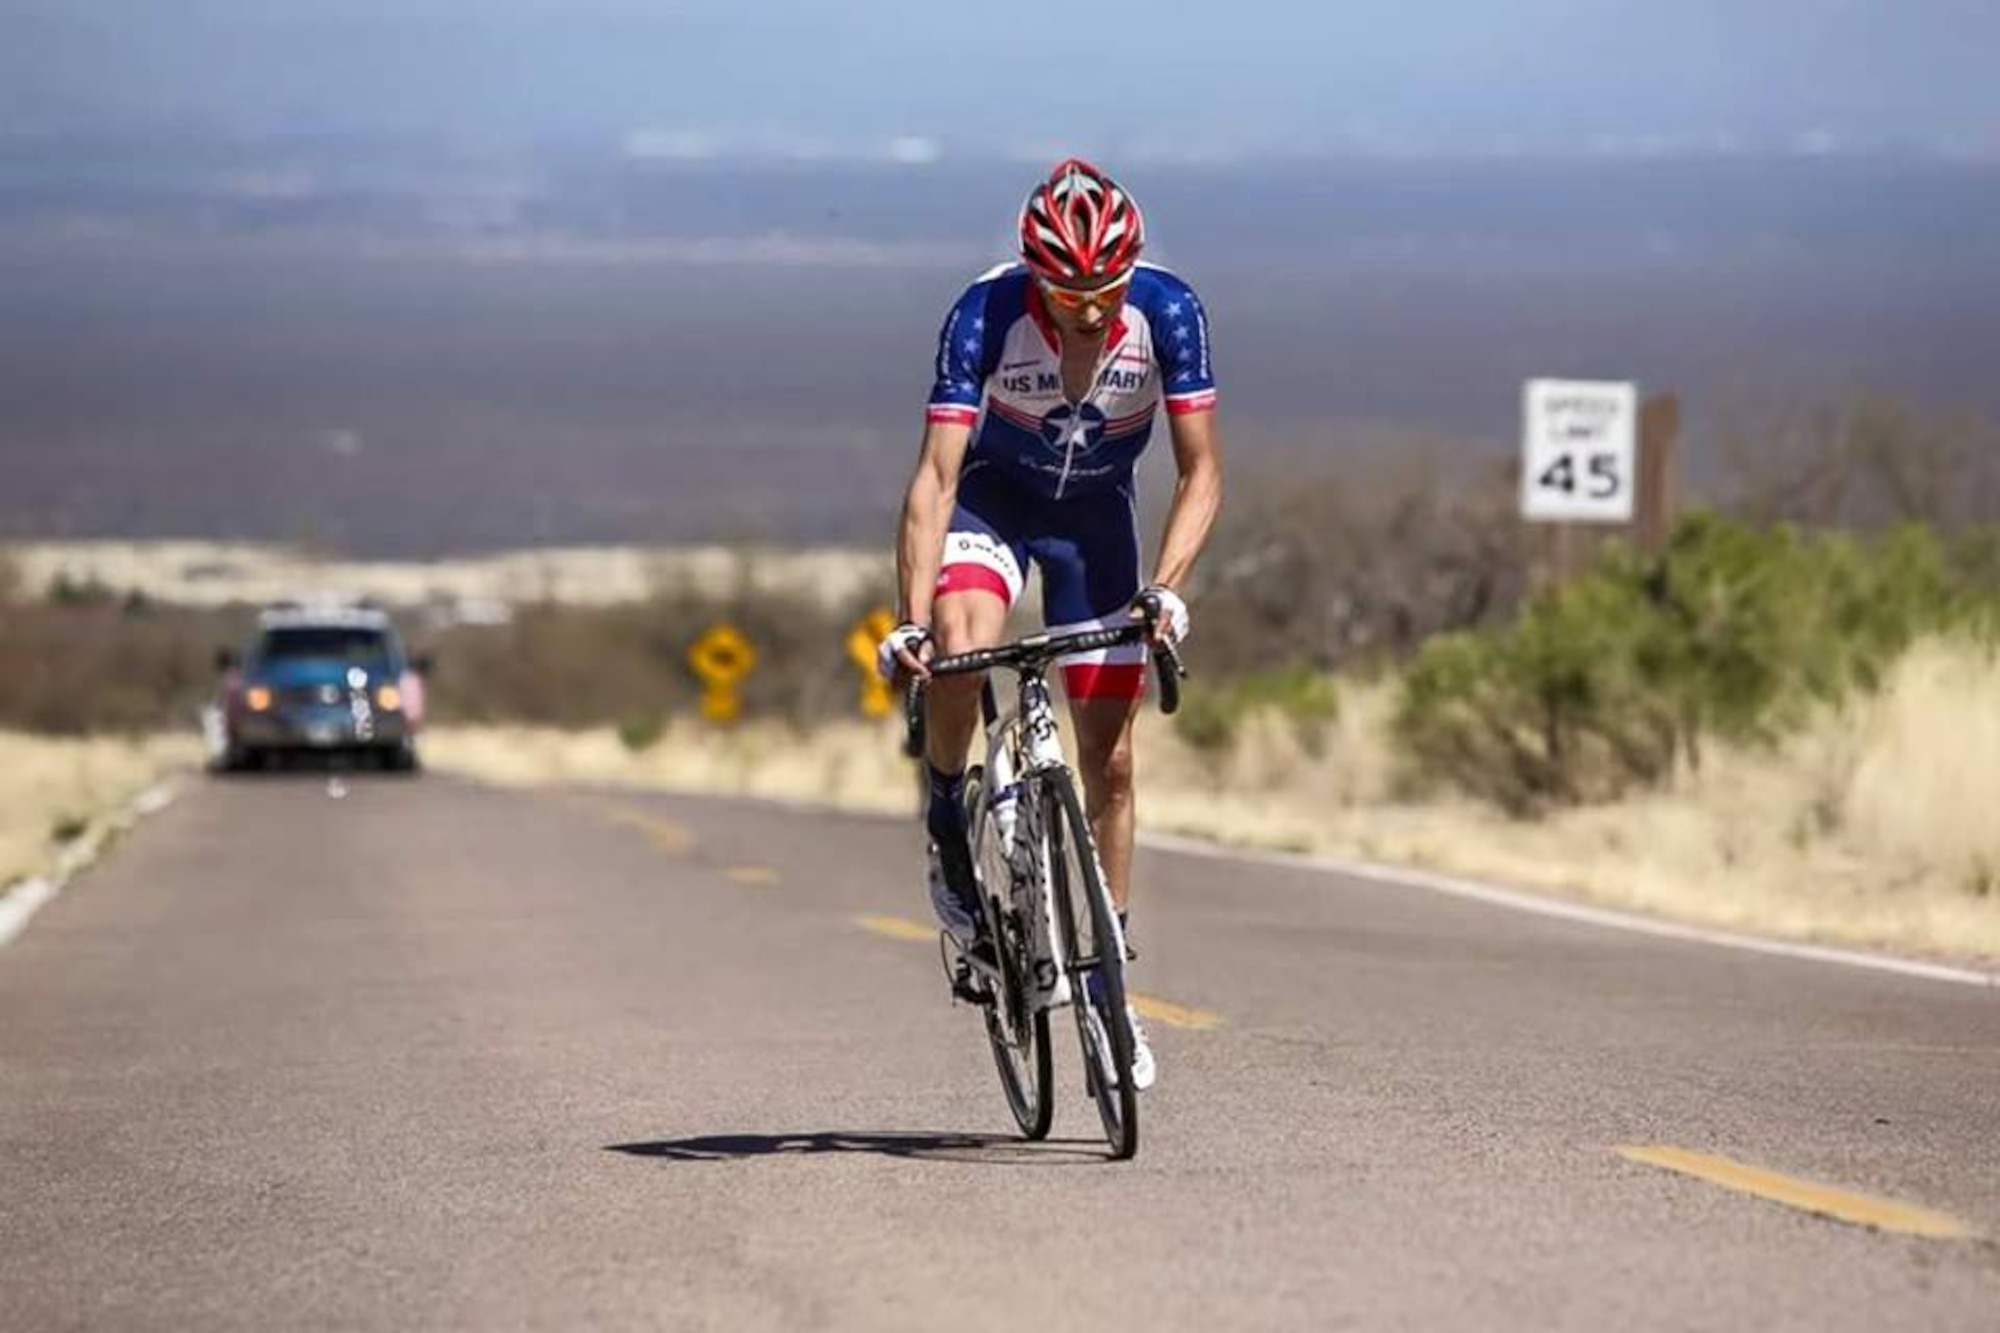 Oregon Air National Guard Tech. Sgt. Dwayne Farr, an Egress repairman with the 142nd Fighter Wing participates in altitude training in Tucson, Arizona, riding up to Kitt Peak with an elevation topping out at 9,000 feet above sea level, July 1, 2015. (Photo courtesy of Tech. Sgt. Dwayne Farr)
